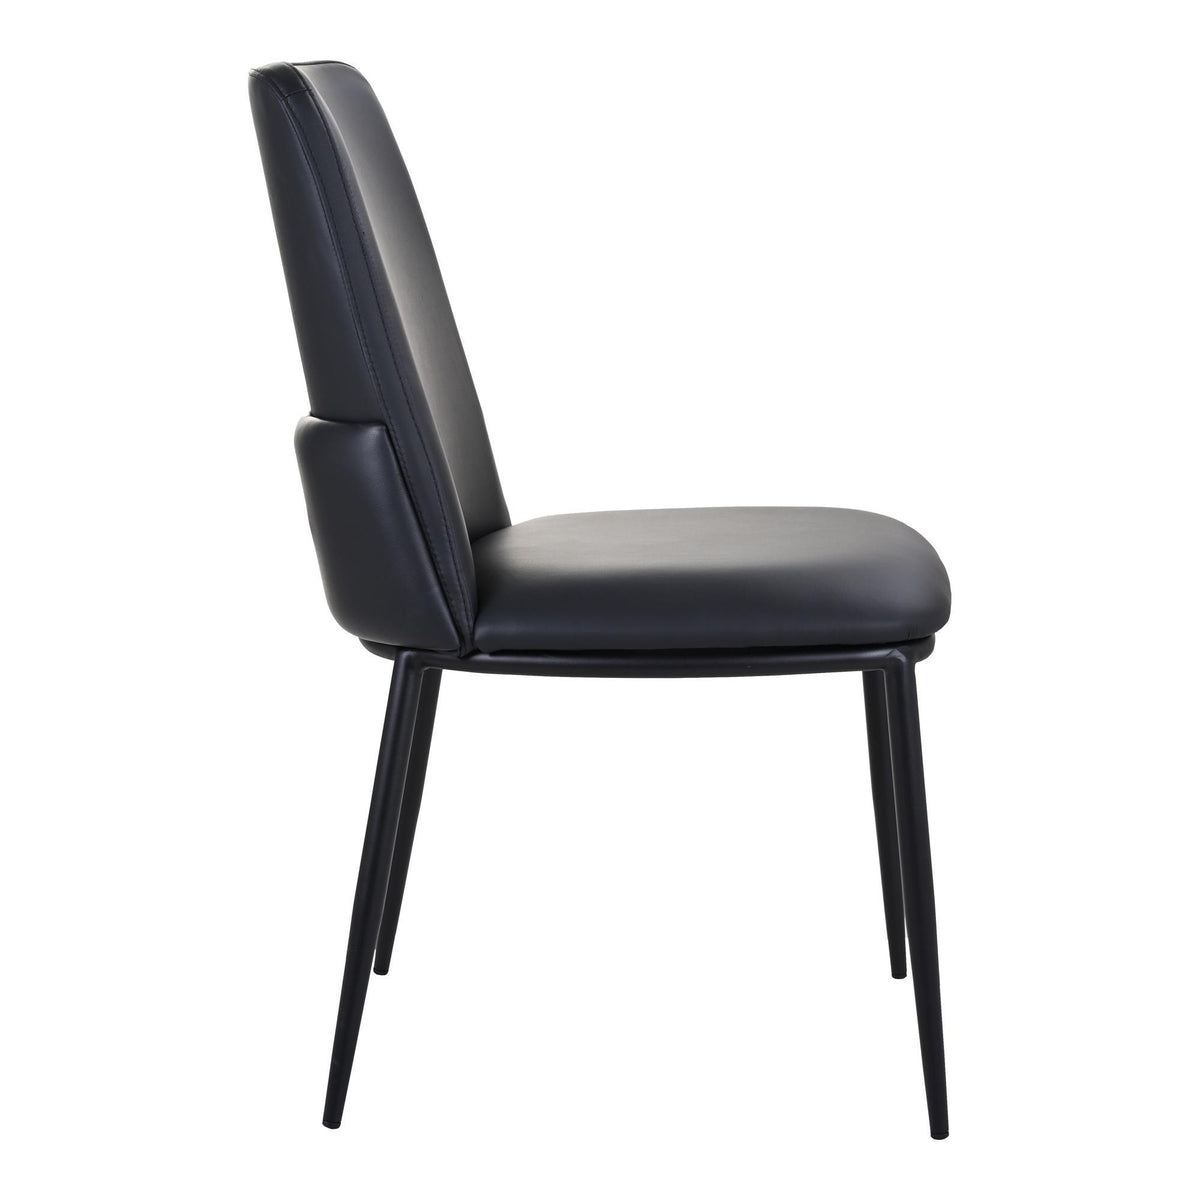 Moe's Home Collection Douglas Dining Chair Black - EQ-1017-02